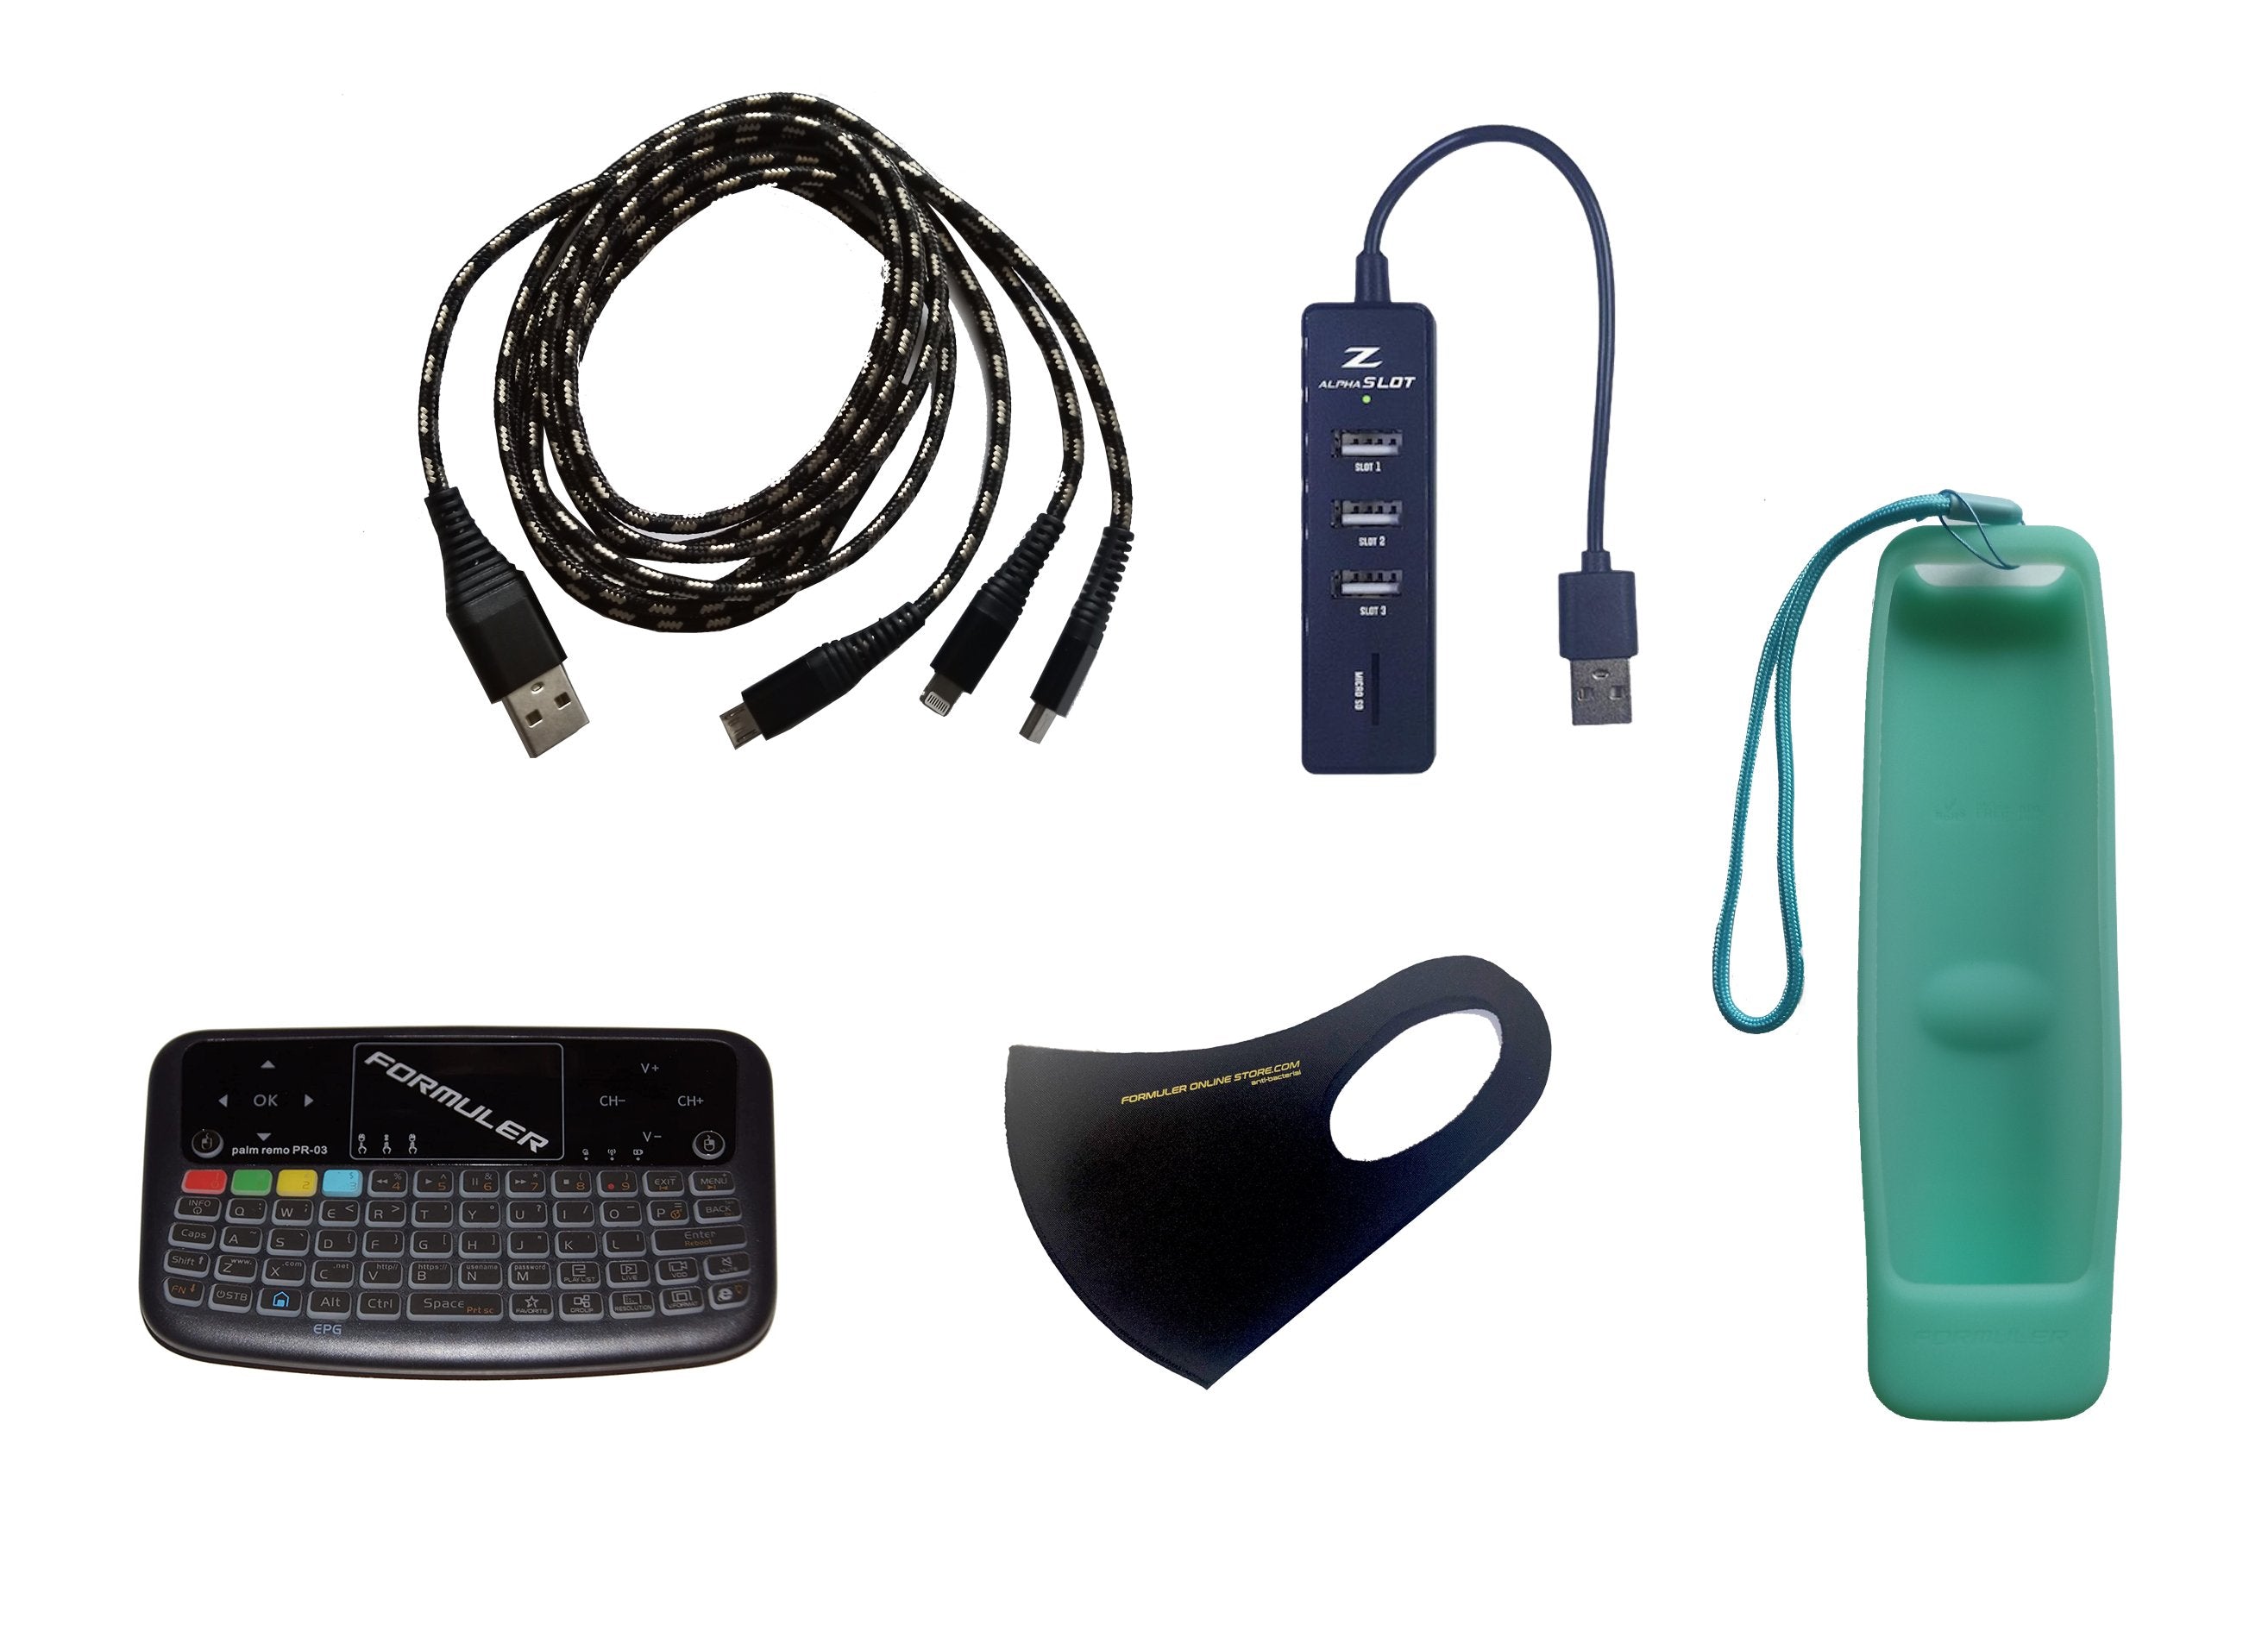 Accessoires bundle included: Wireless Mini keyboard with touchpad + USB Hub + USB 3-1 Cord extension + Green Remote cover + Mask